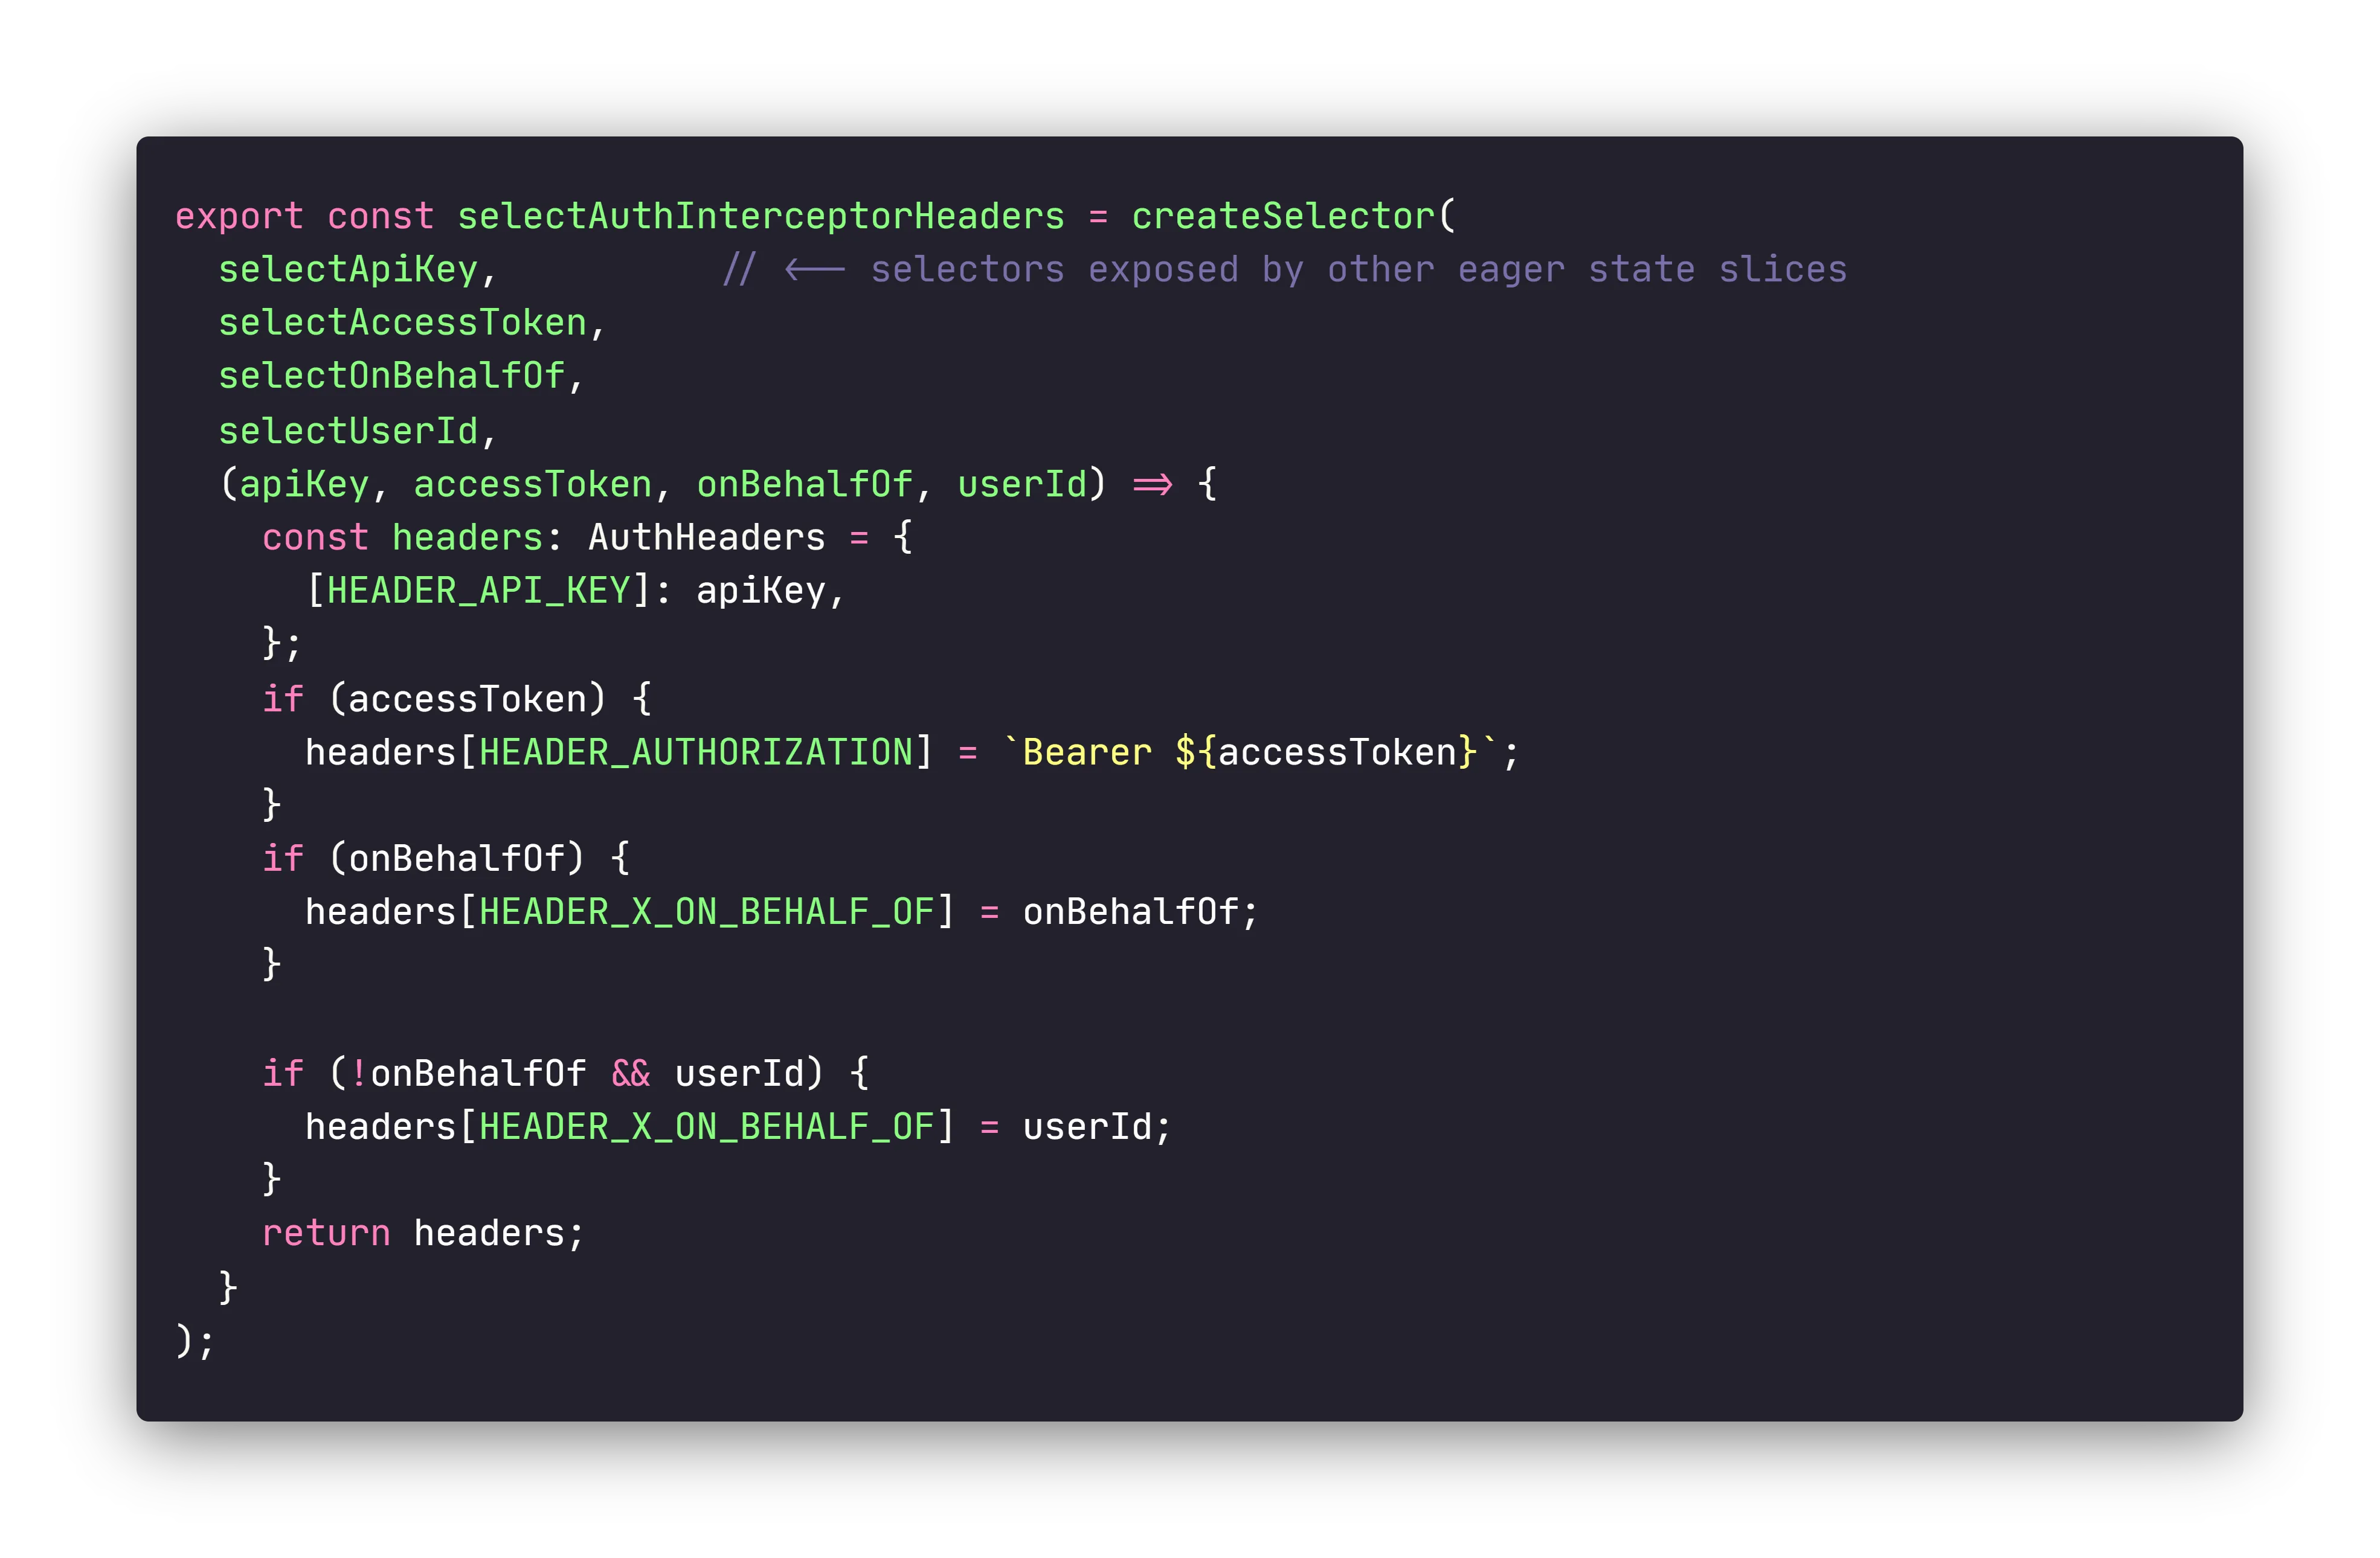 Example of a NgRx local selector implementation which combines data exposed by the selectors of other eager state slices